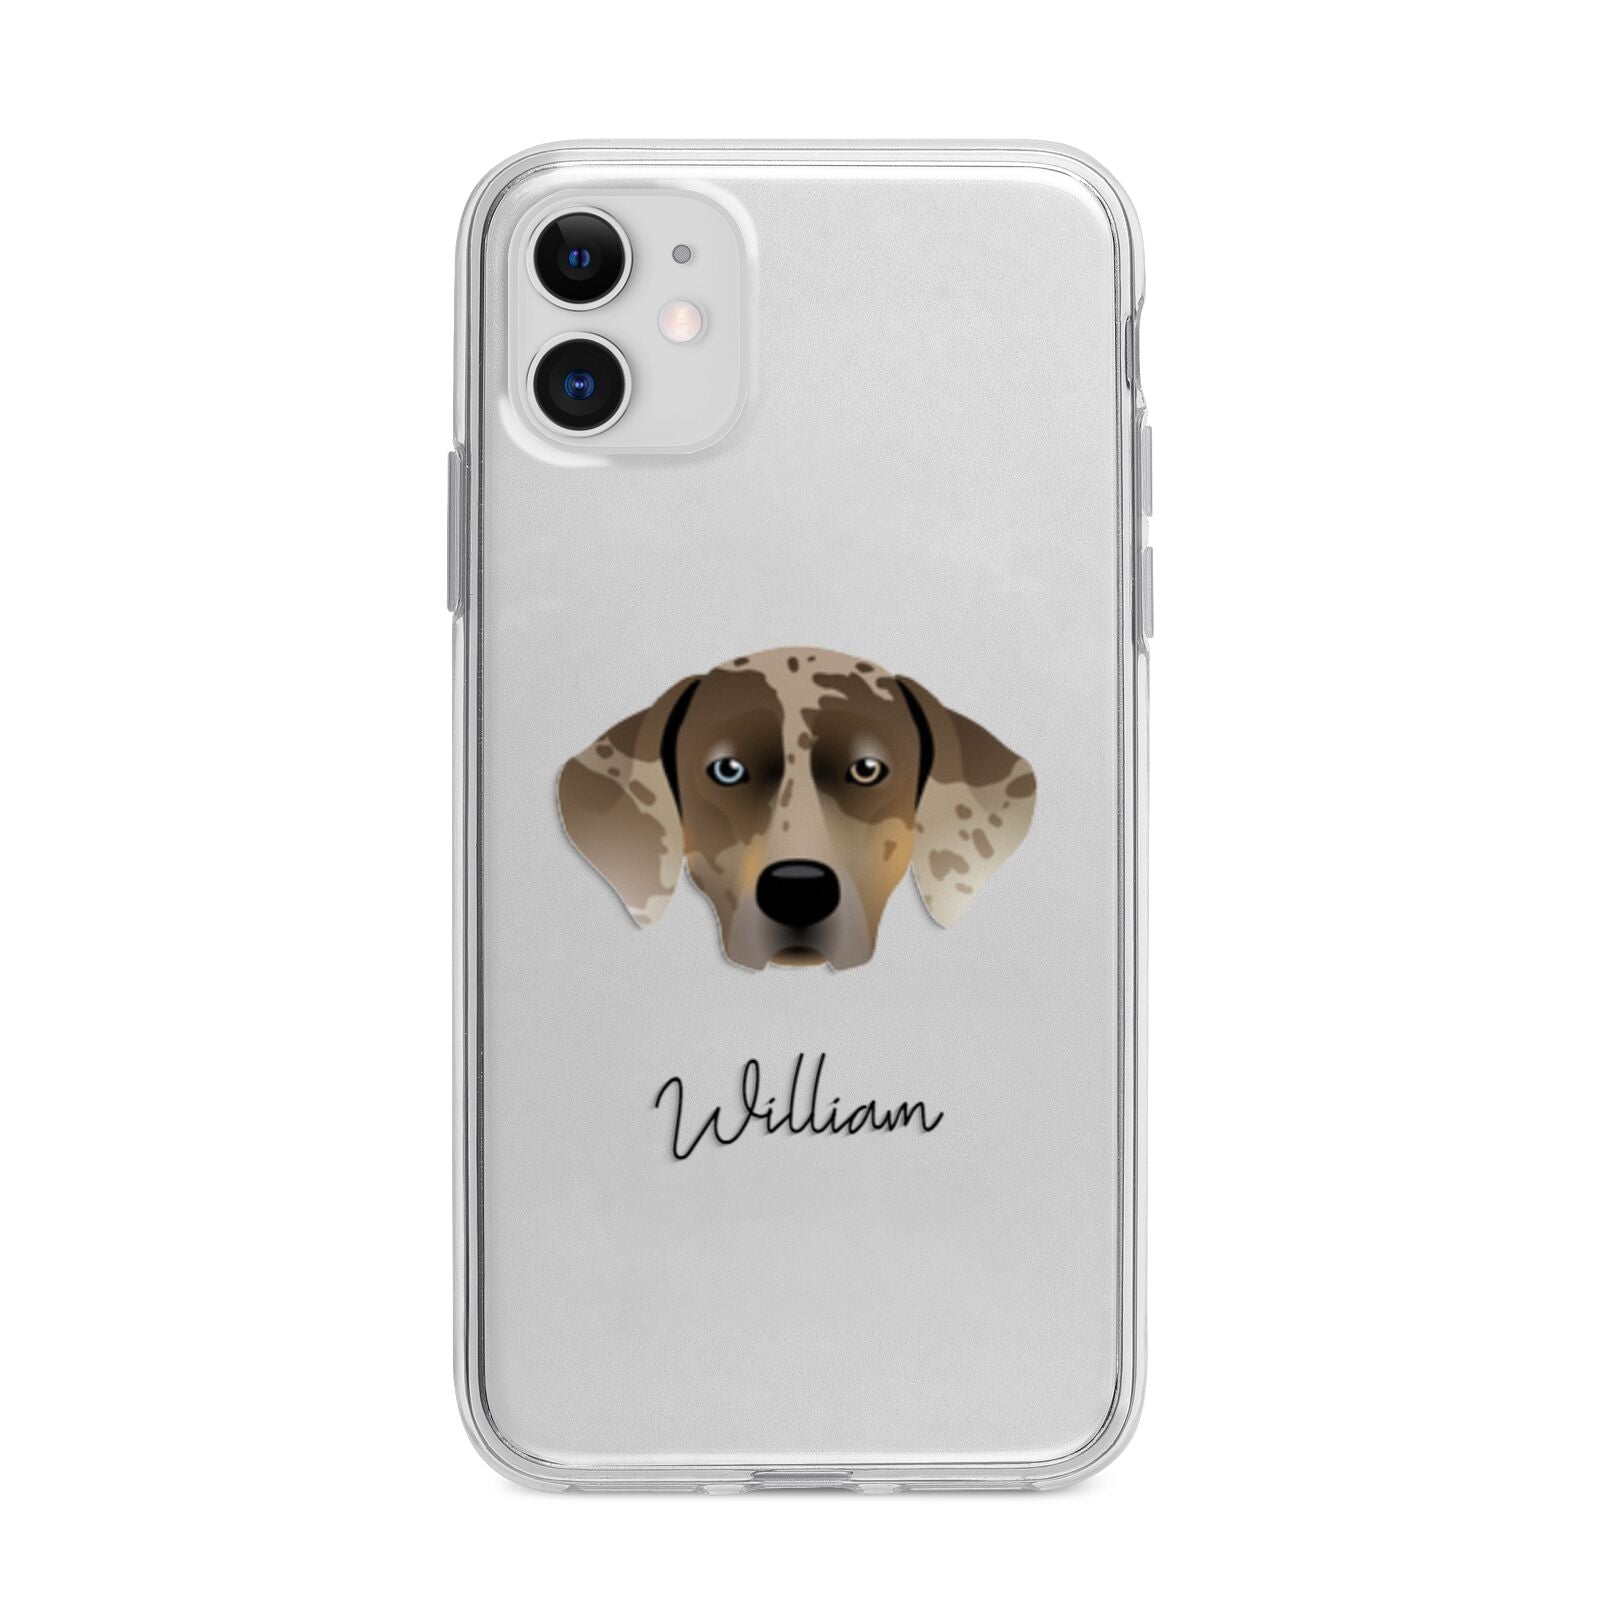 Catahoula Leopard Dog Personalised Apple iPhone 11 in White with Bumper Case